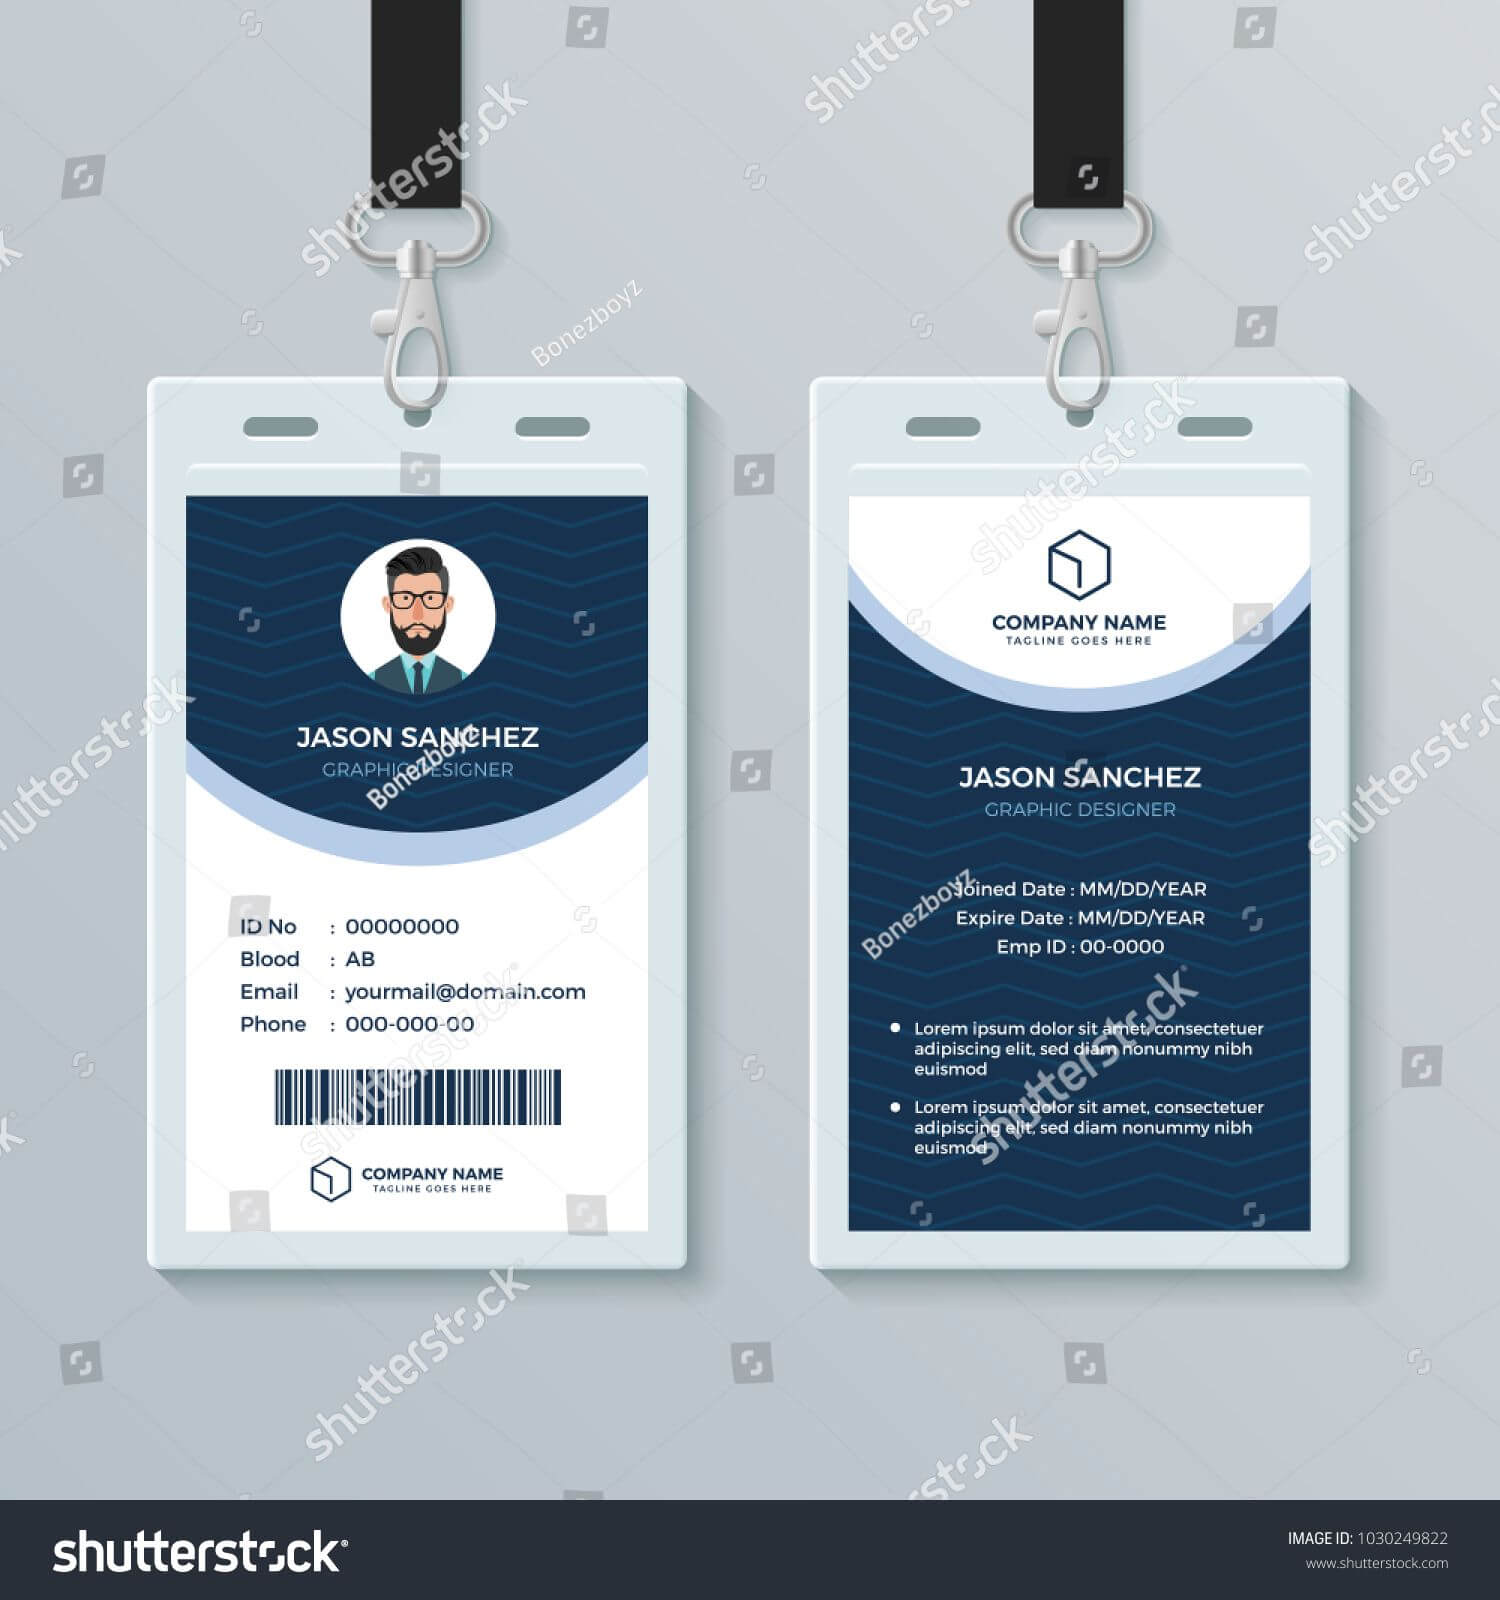 003 Free Id Card Template Fascinating Ideas Student Psd Pertaining To Free Id Card Template Word